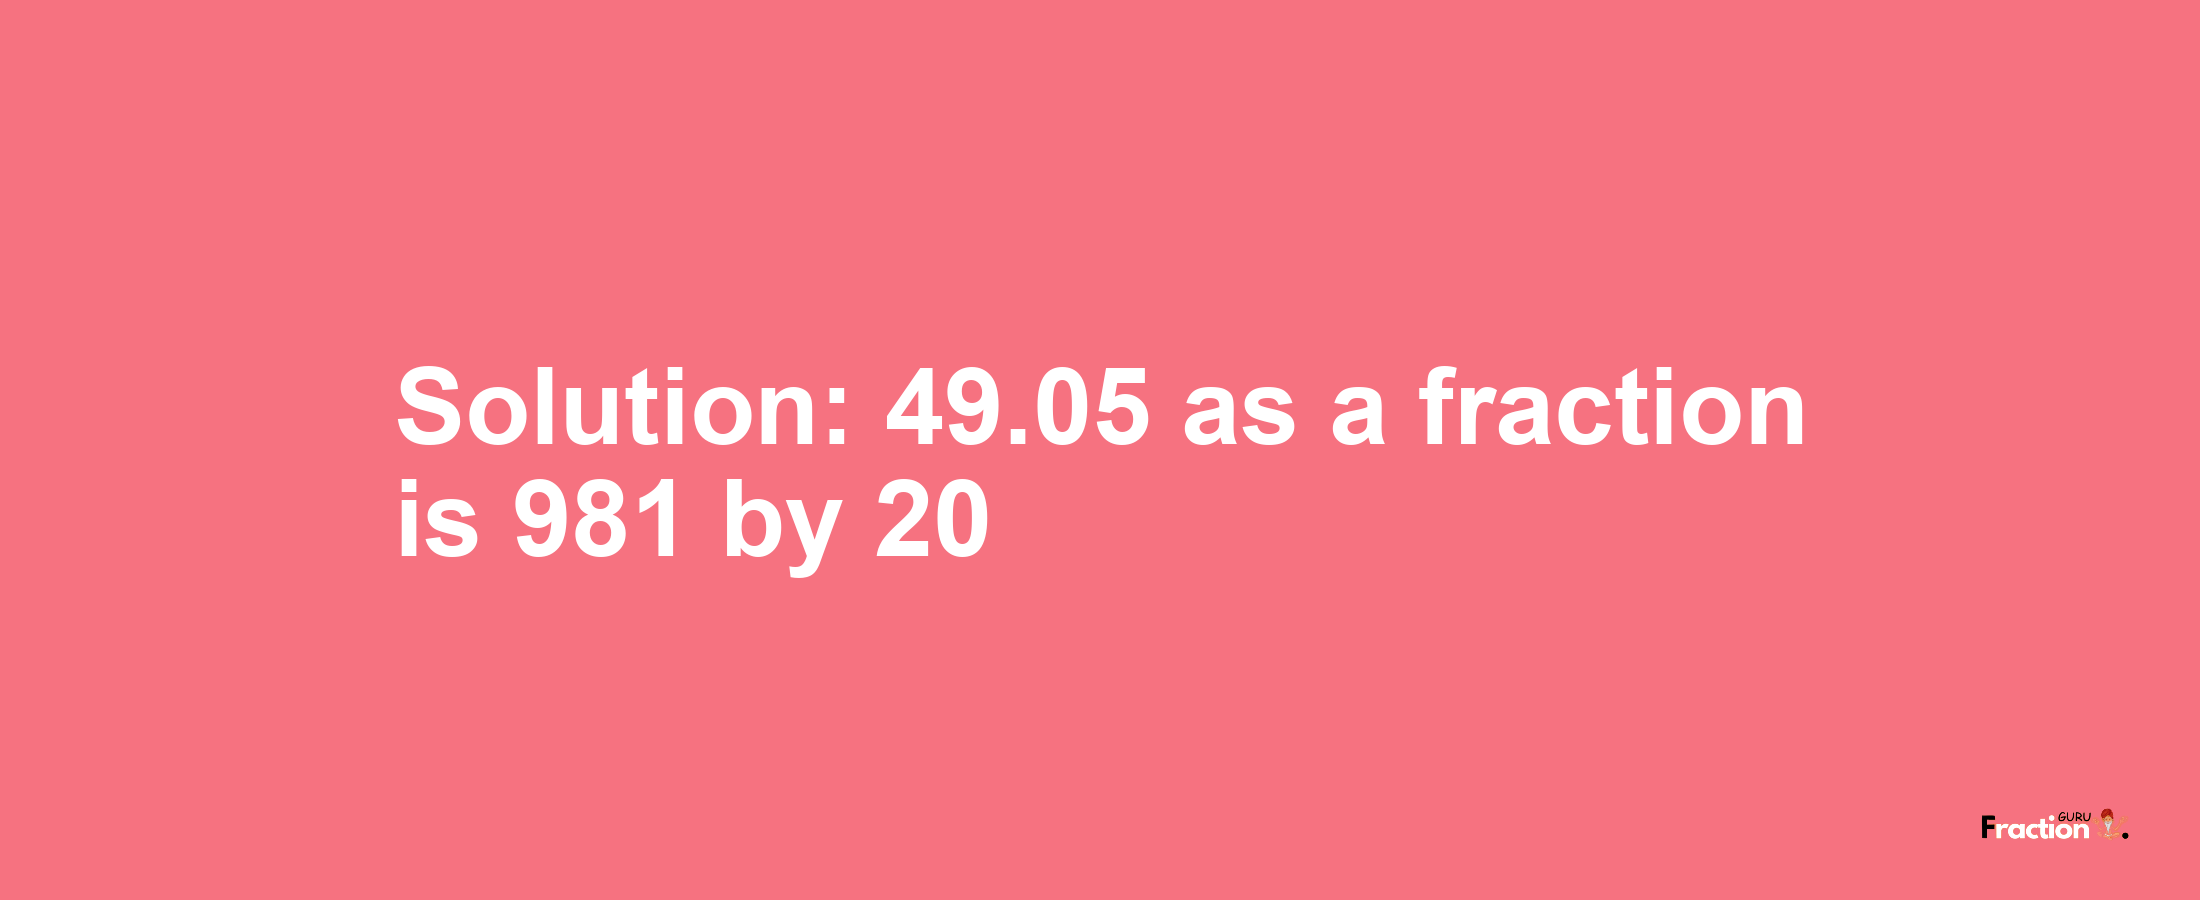 Solution:49.05 as a fraction is 981/20